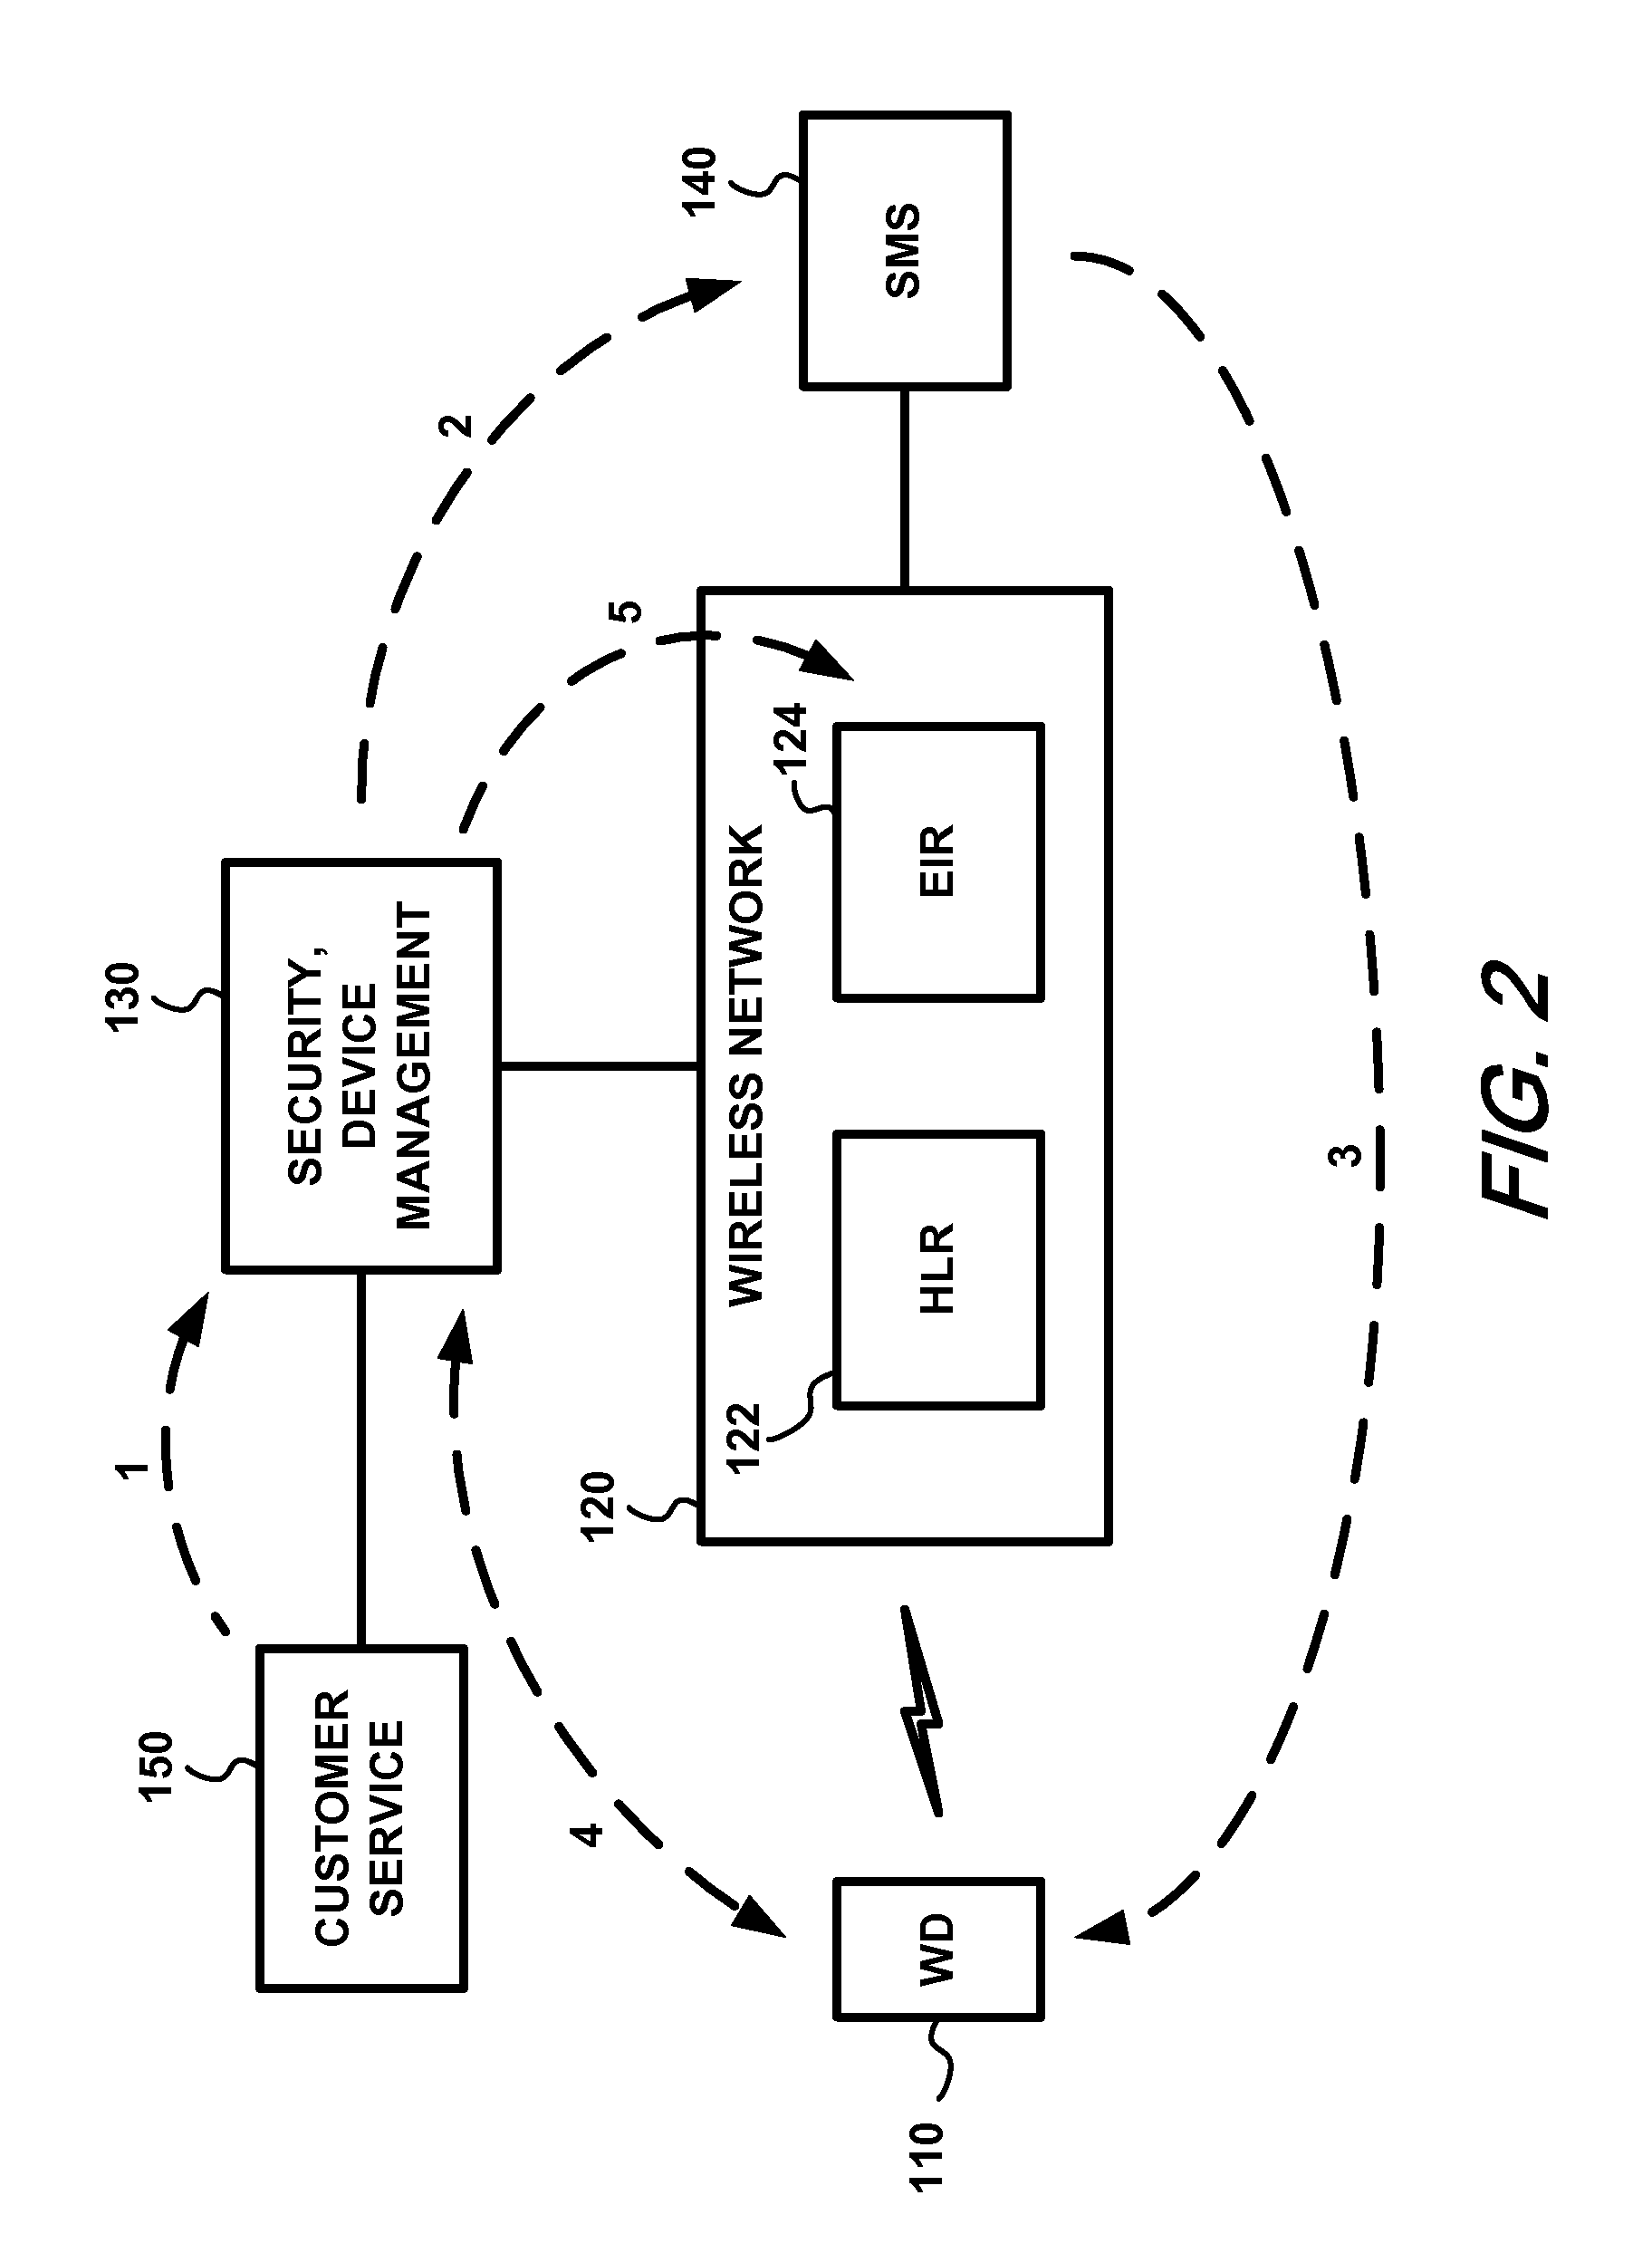 System and method for protecting data in wireless devices